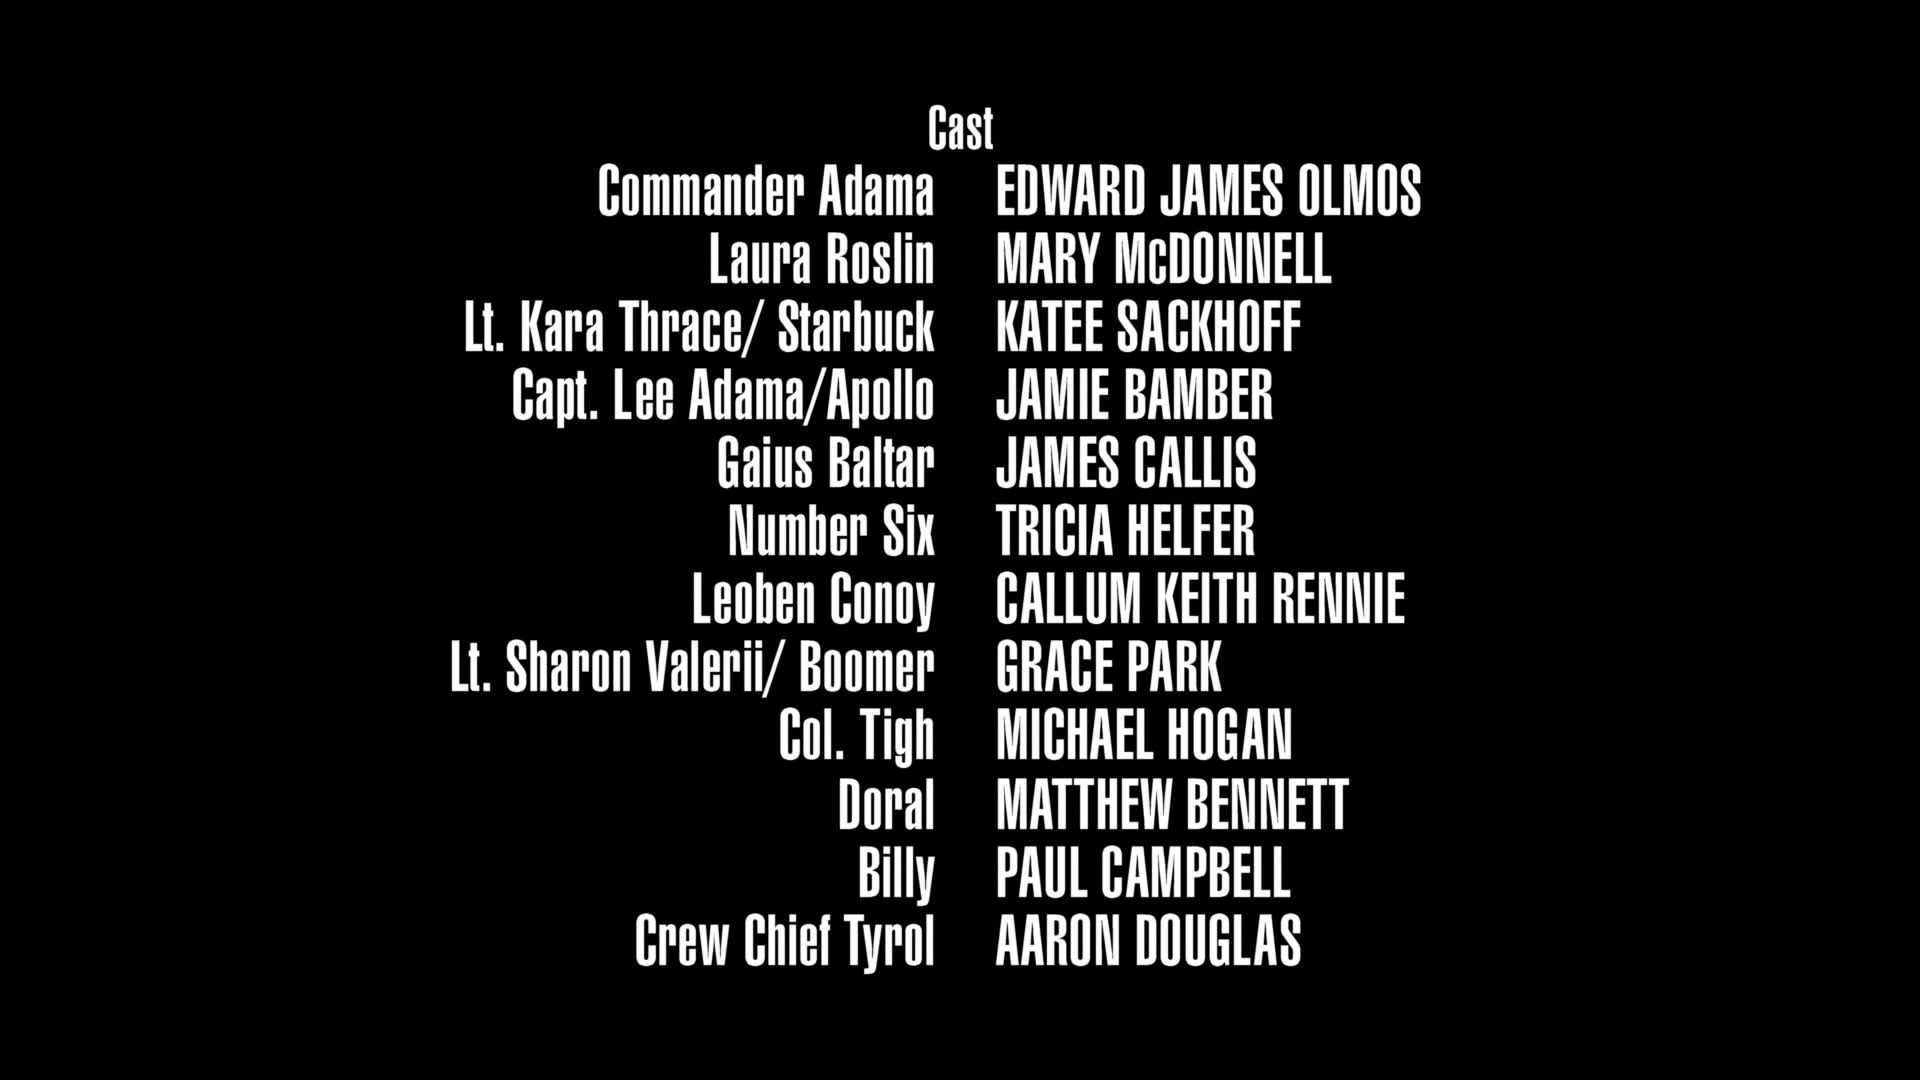 The Miniseries end credits